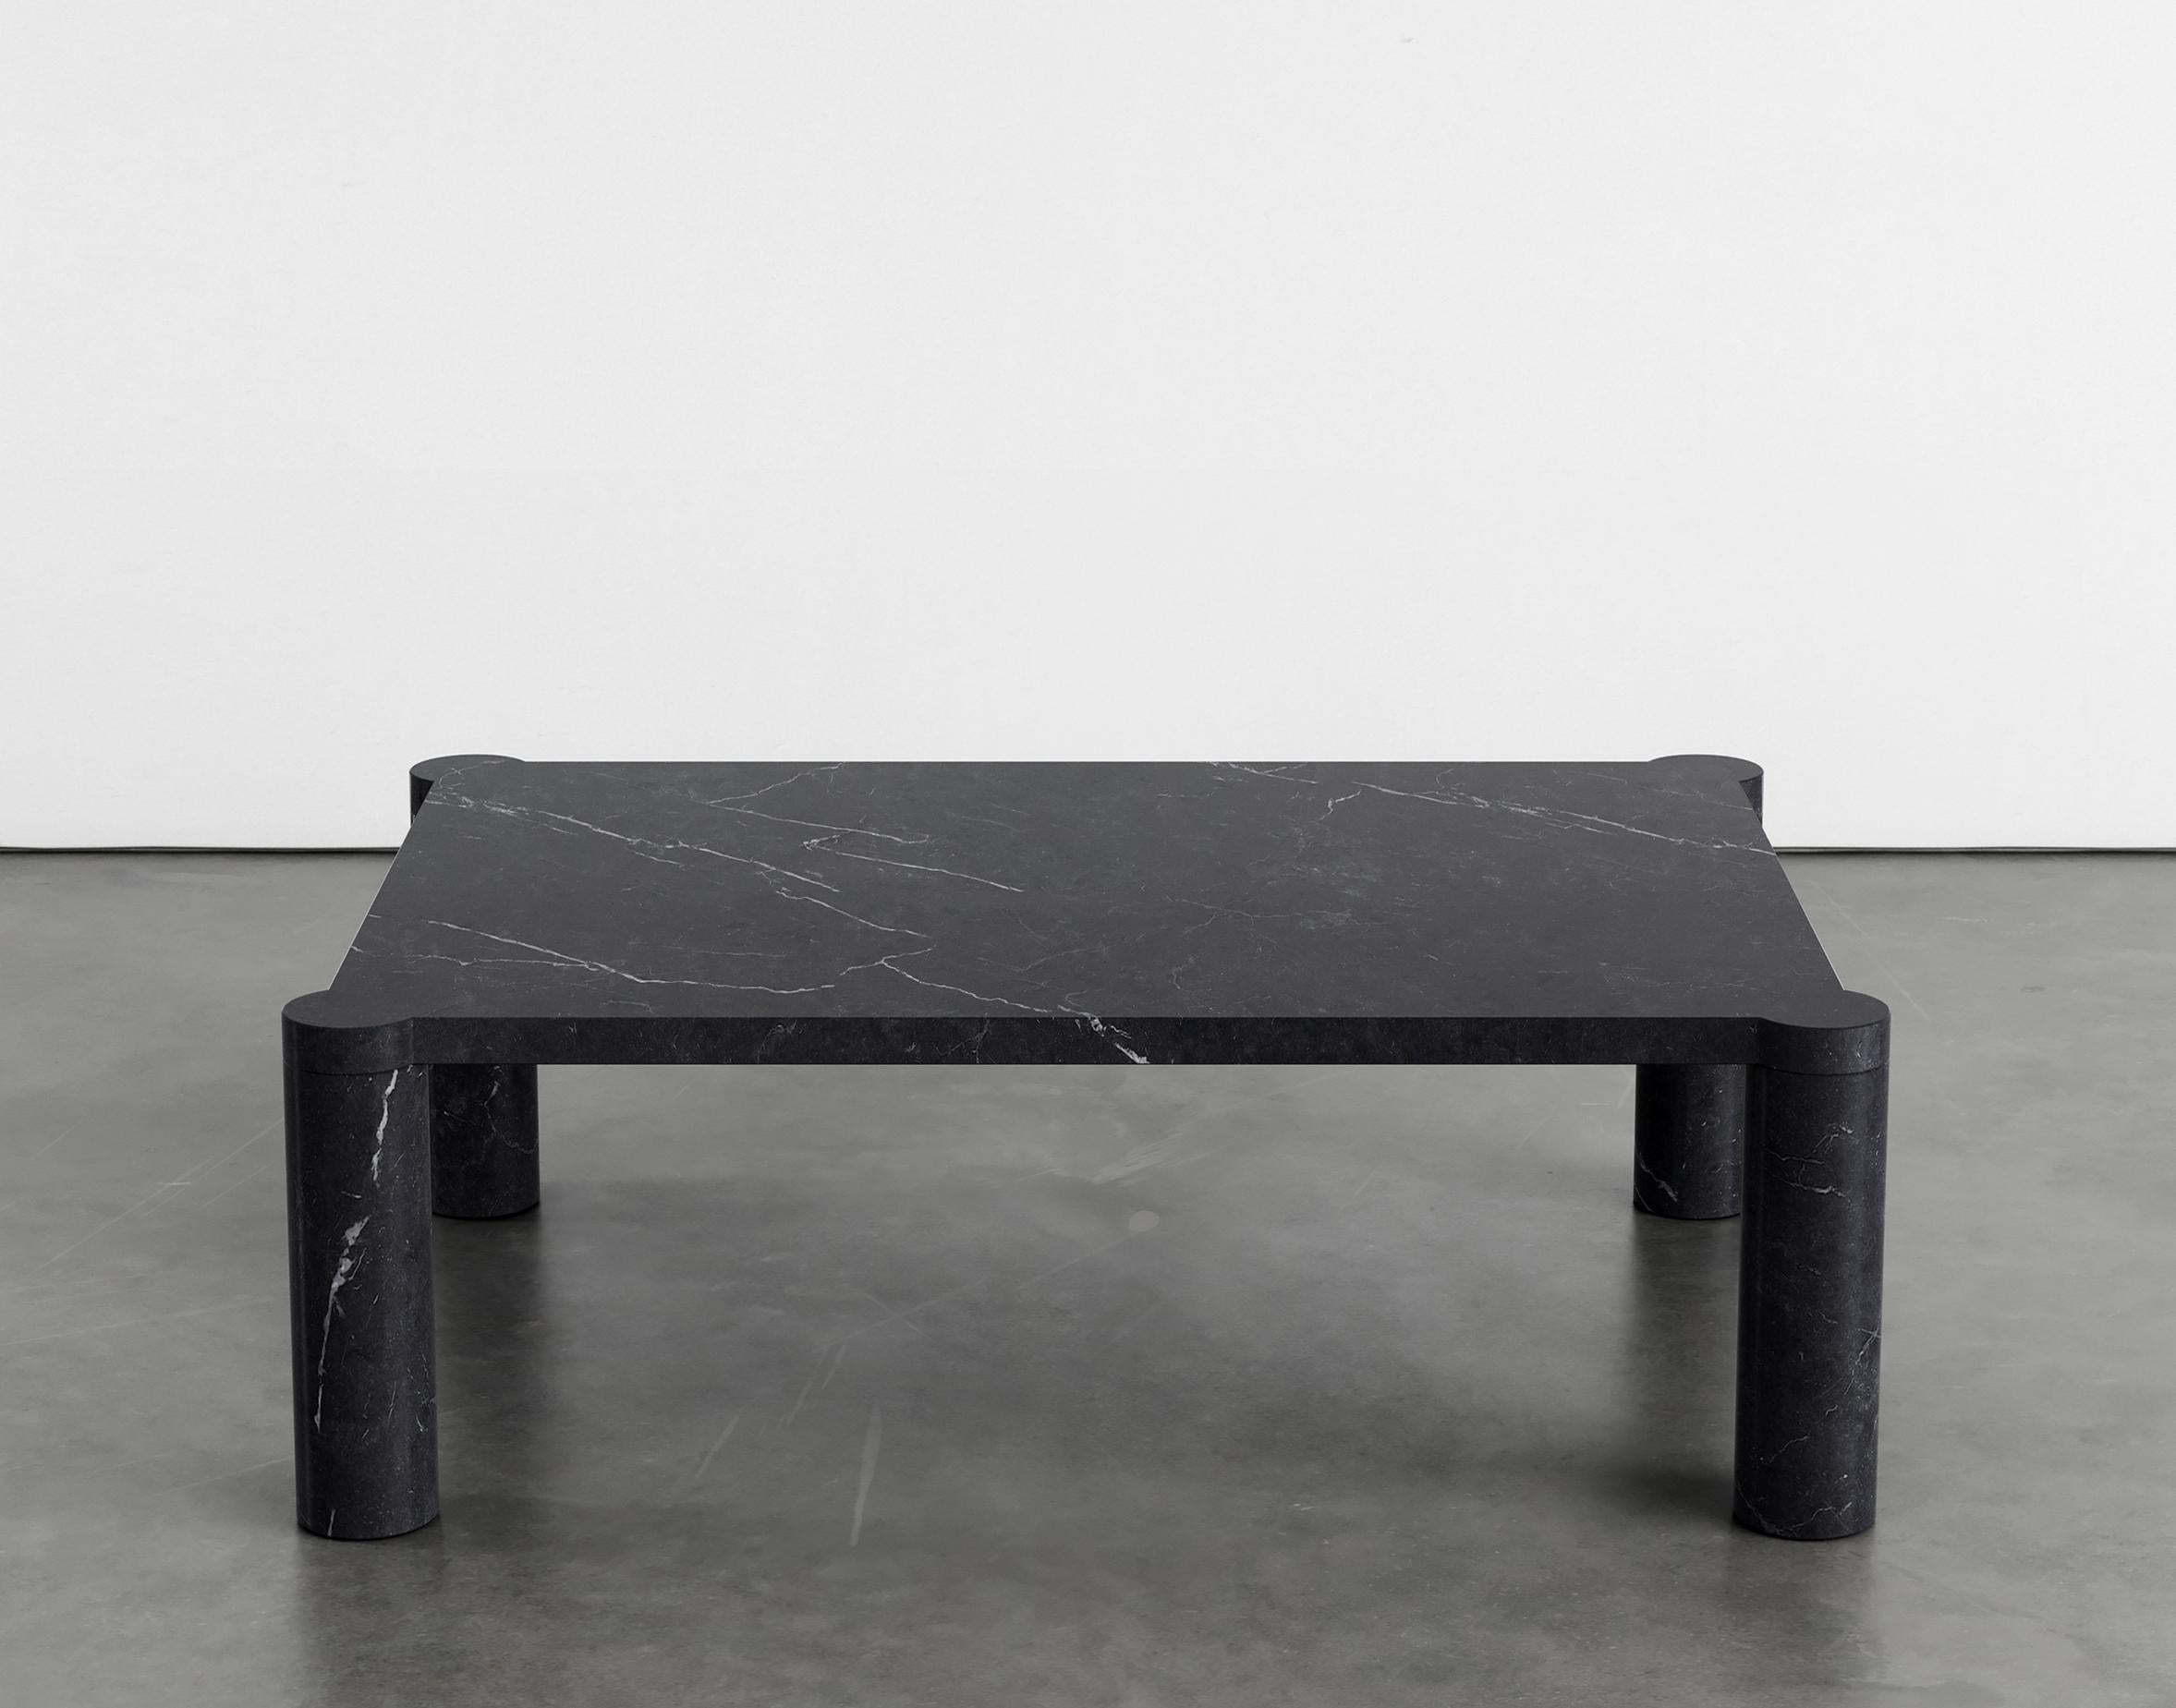 Alessio 107 coffee table by Agglomerati 
Dimensions: D 70 x W 100 x H 33 cm 
Materials: Black Marquina. Available in other stones. 

Agglomerati is a London-based studio creating distinctive stone furniture. Established in 2019 by Australian